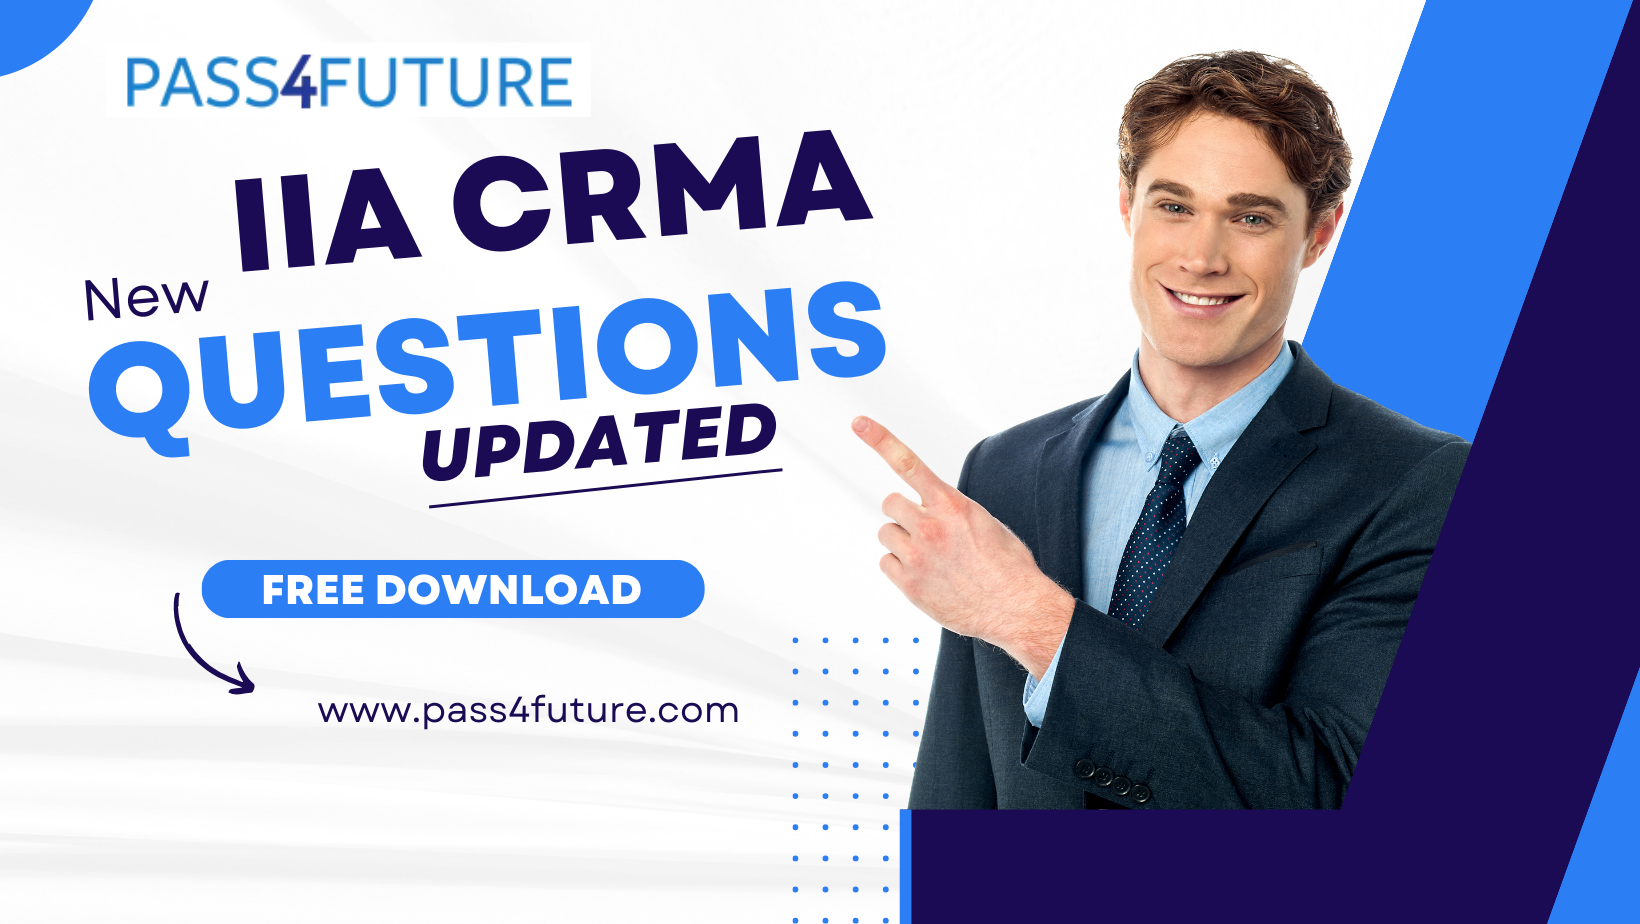 IIA Certification in Risk Management Assurance CRMA Questions